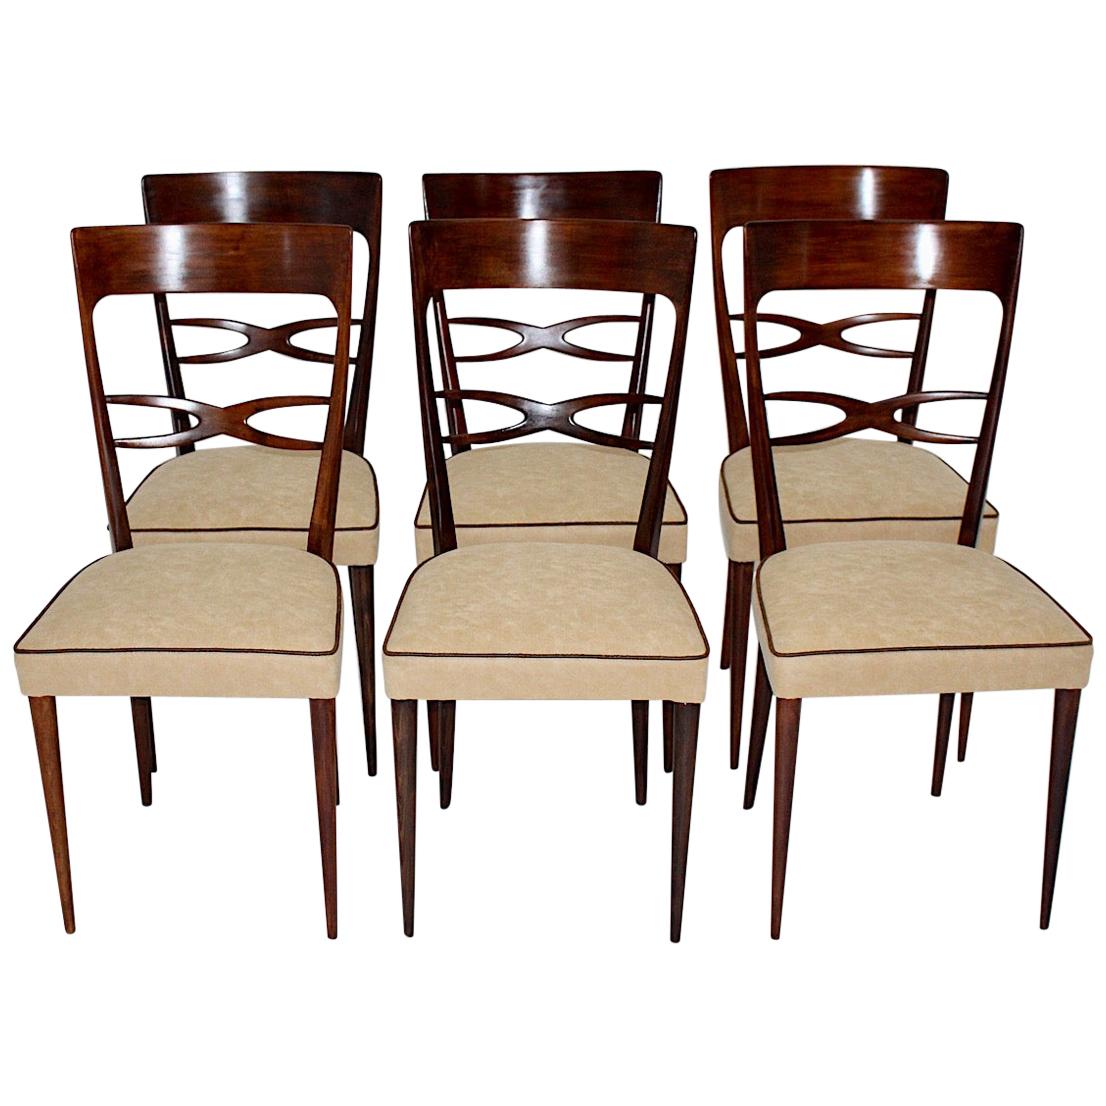 Mid-Century Modern Six Dining Chairs Brown Beech Melchiorre Bega, 1950, Italy